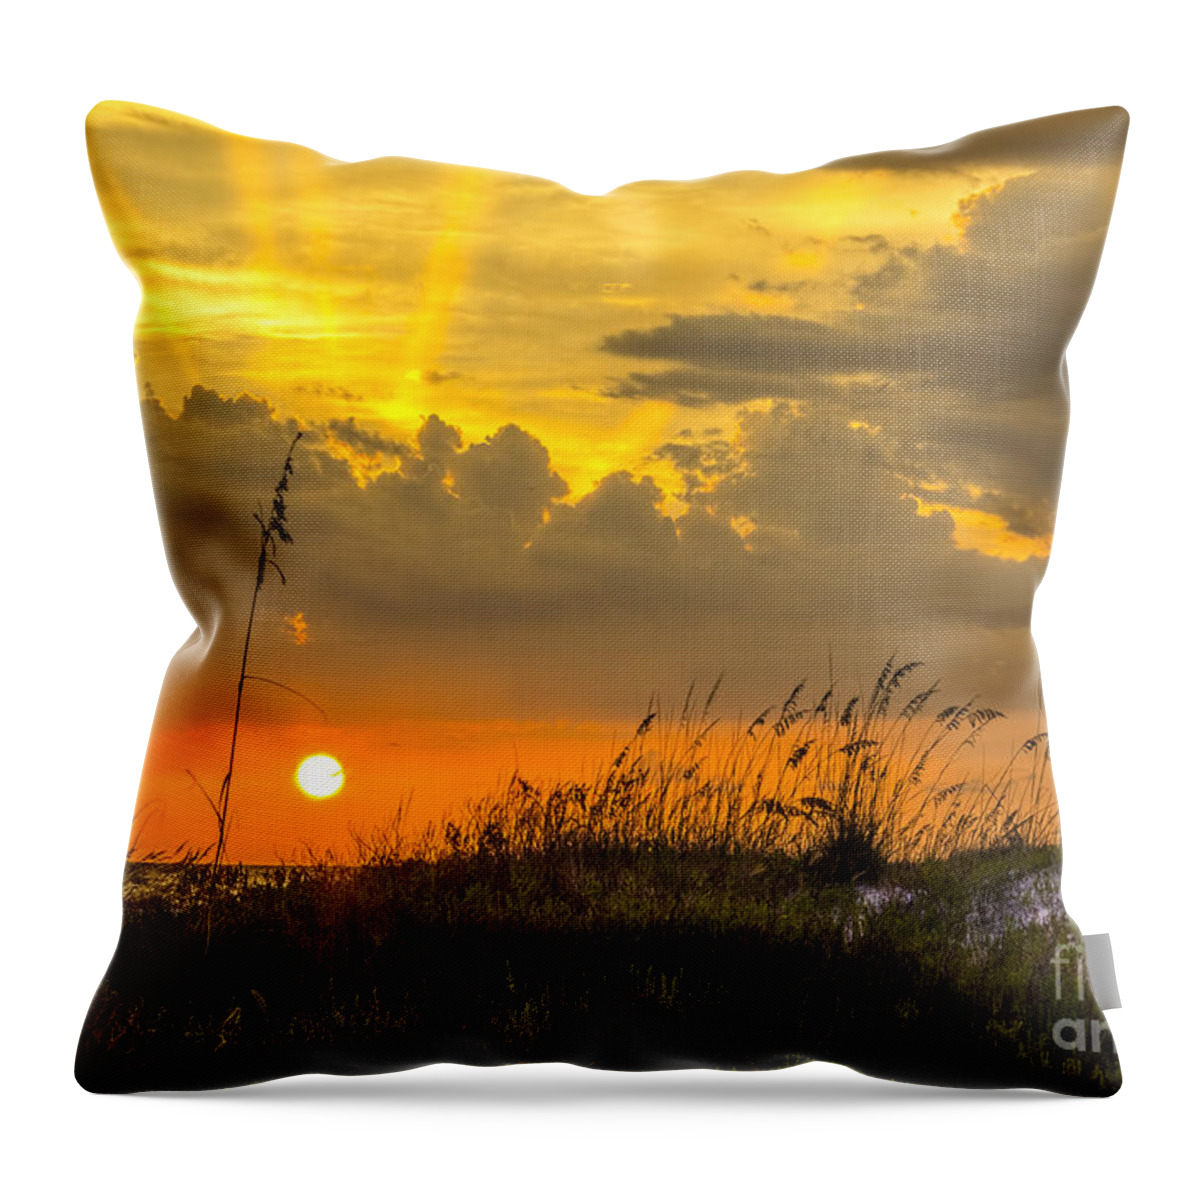 Sarasota Throw Pillow featuring the photograph Summer Sun by Marvin Spates